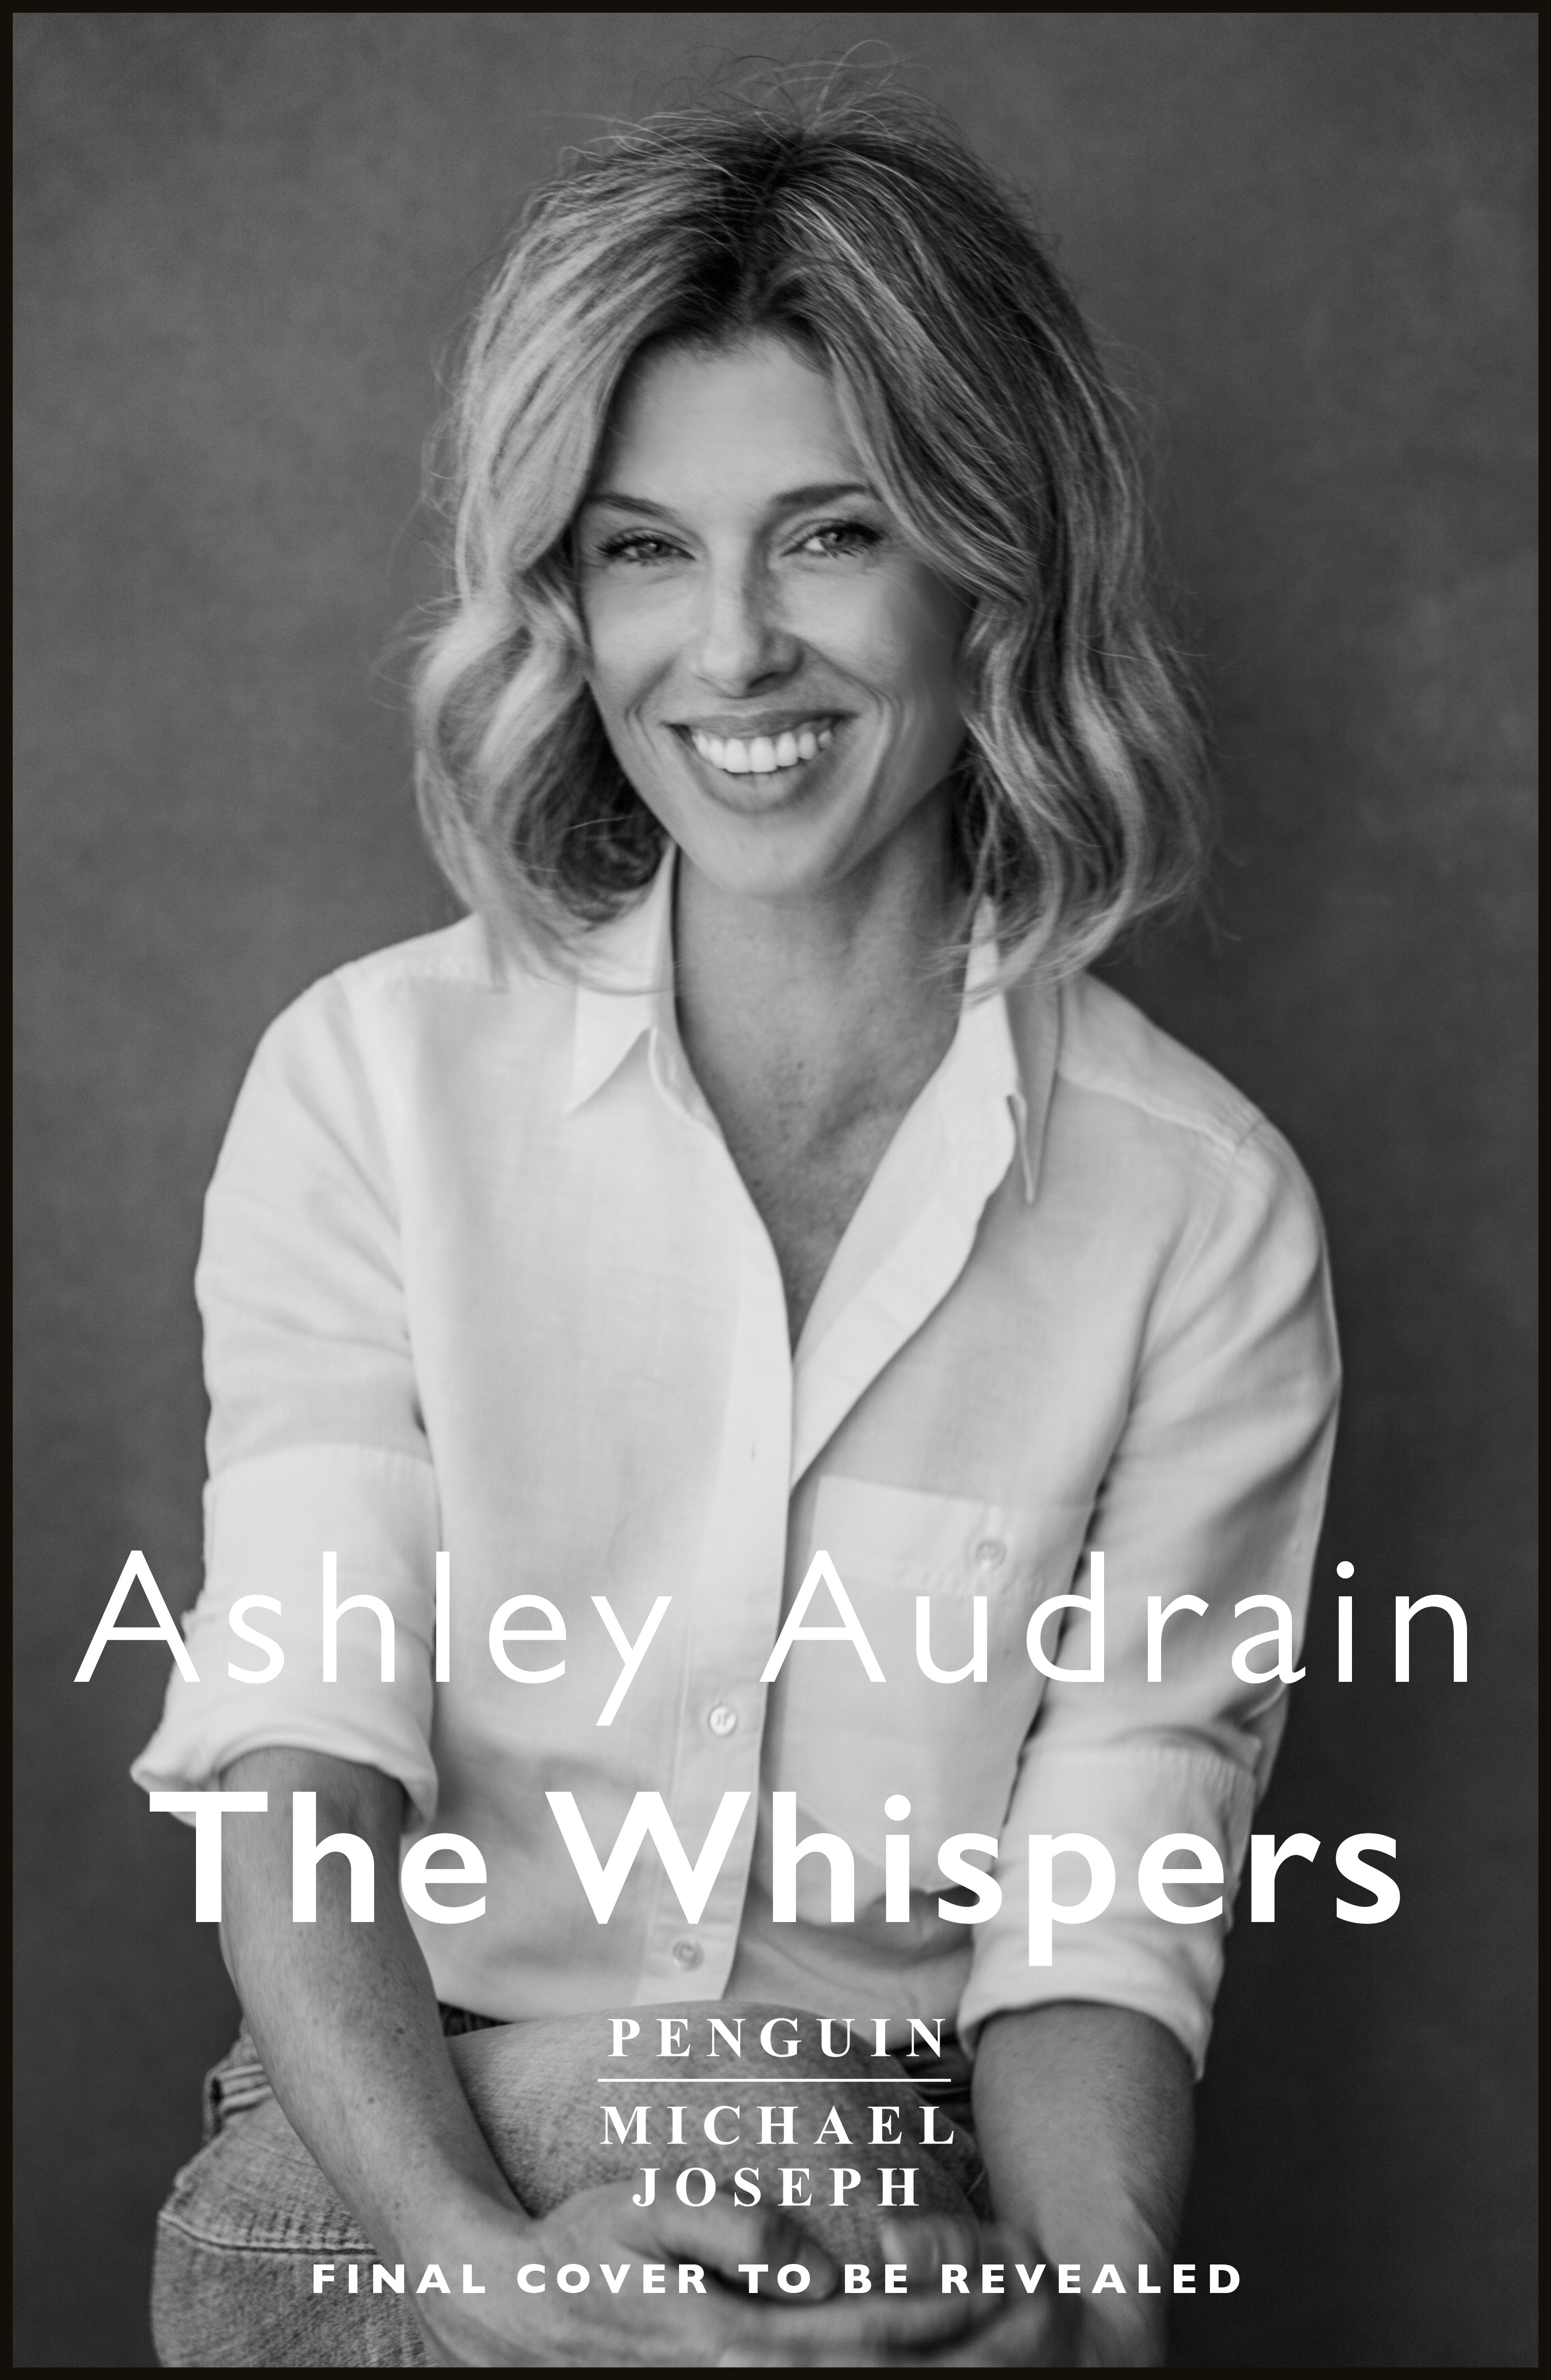 Book “The Whispers” by Ashley Audrain — March 2, 2023